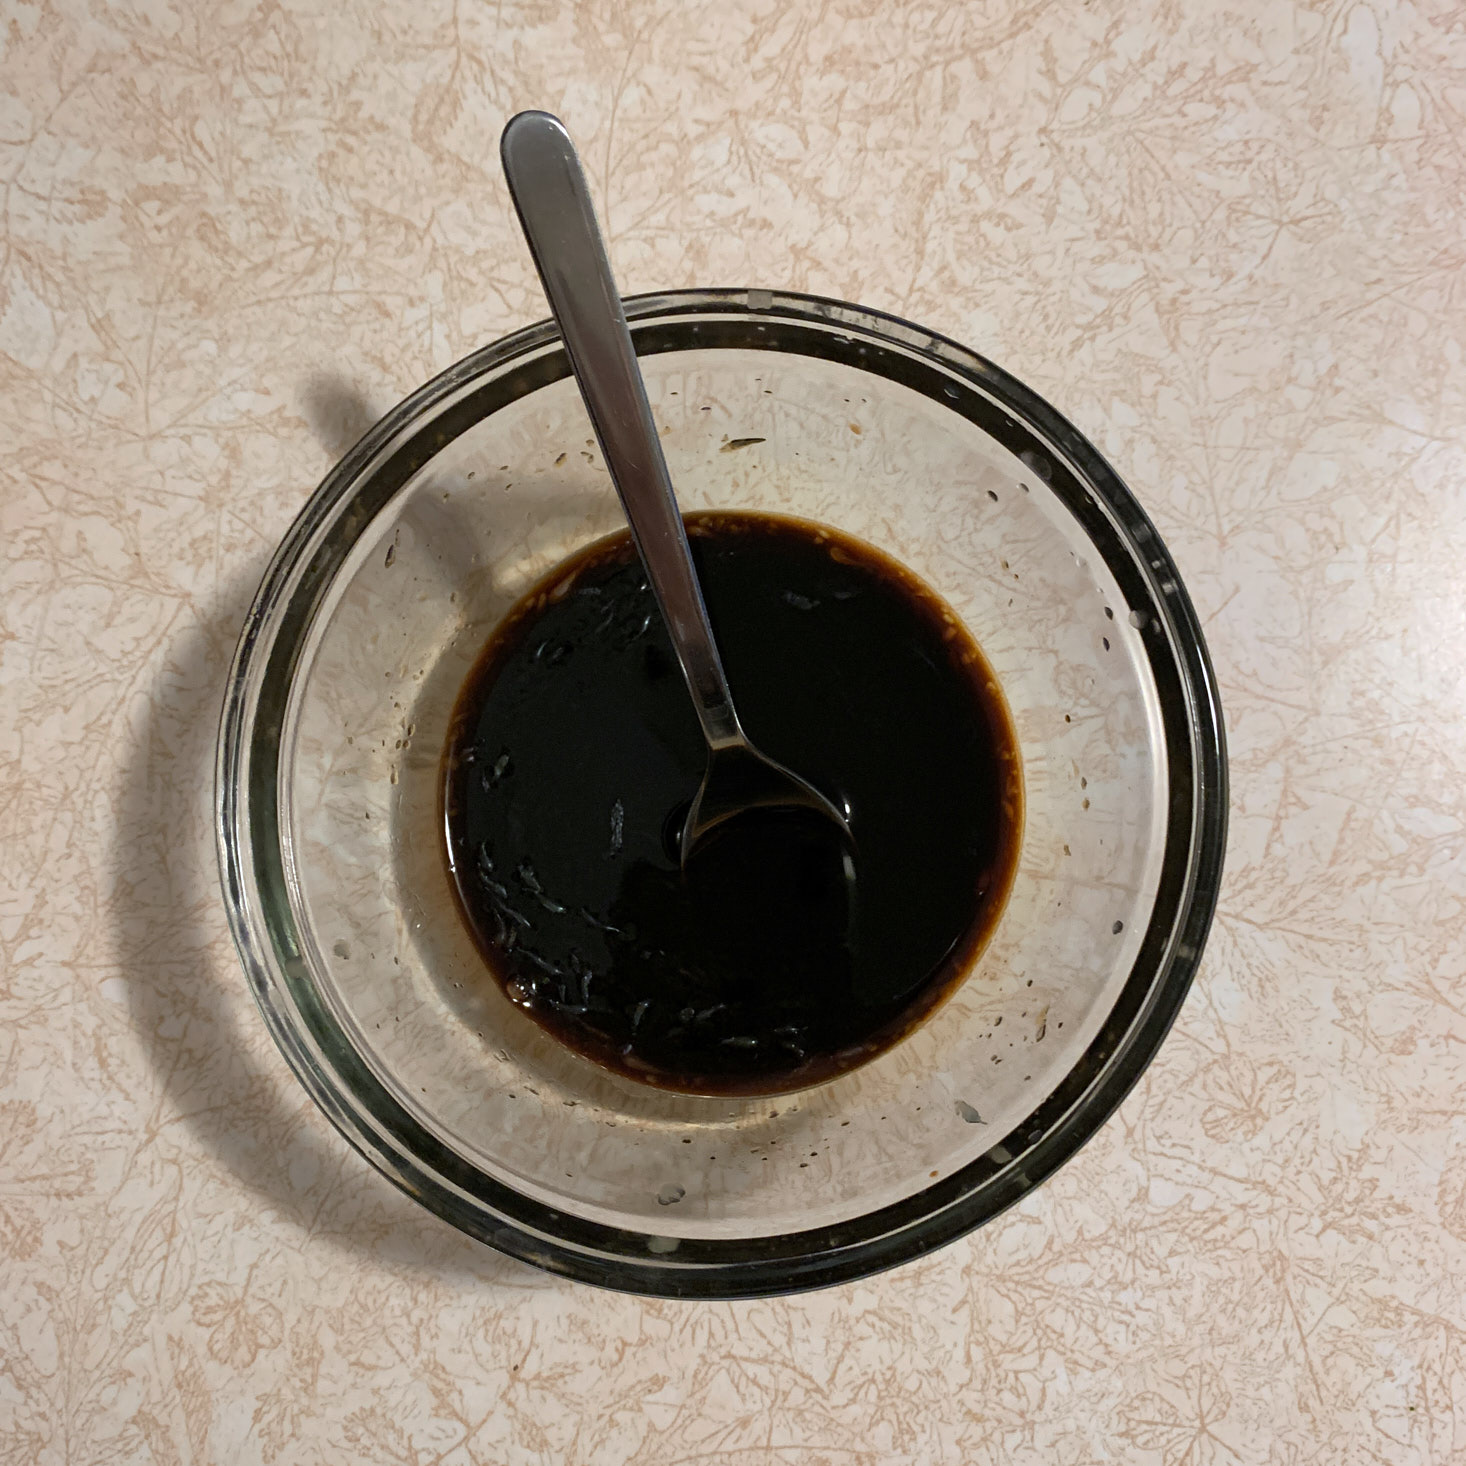 Soy sauce mixture in bowl